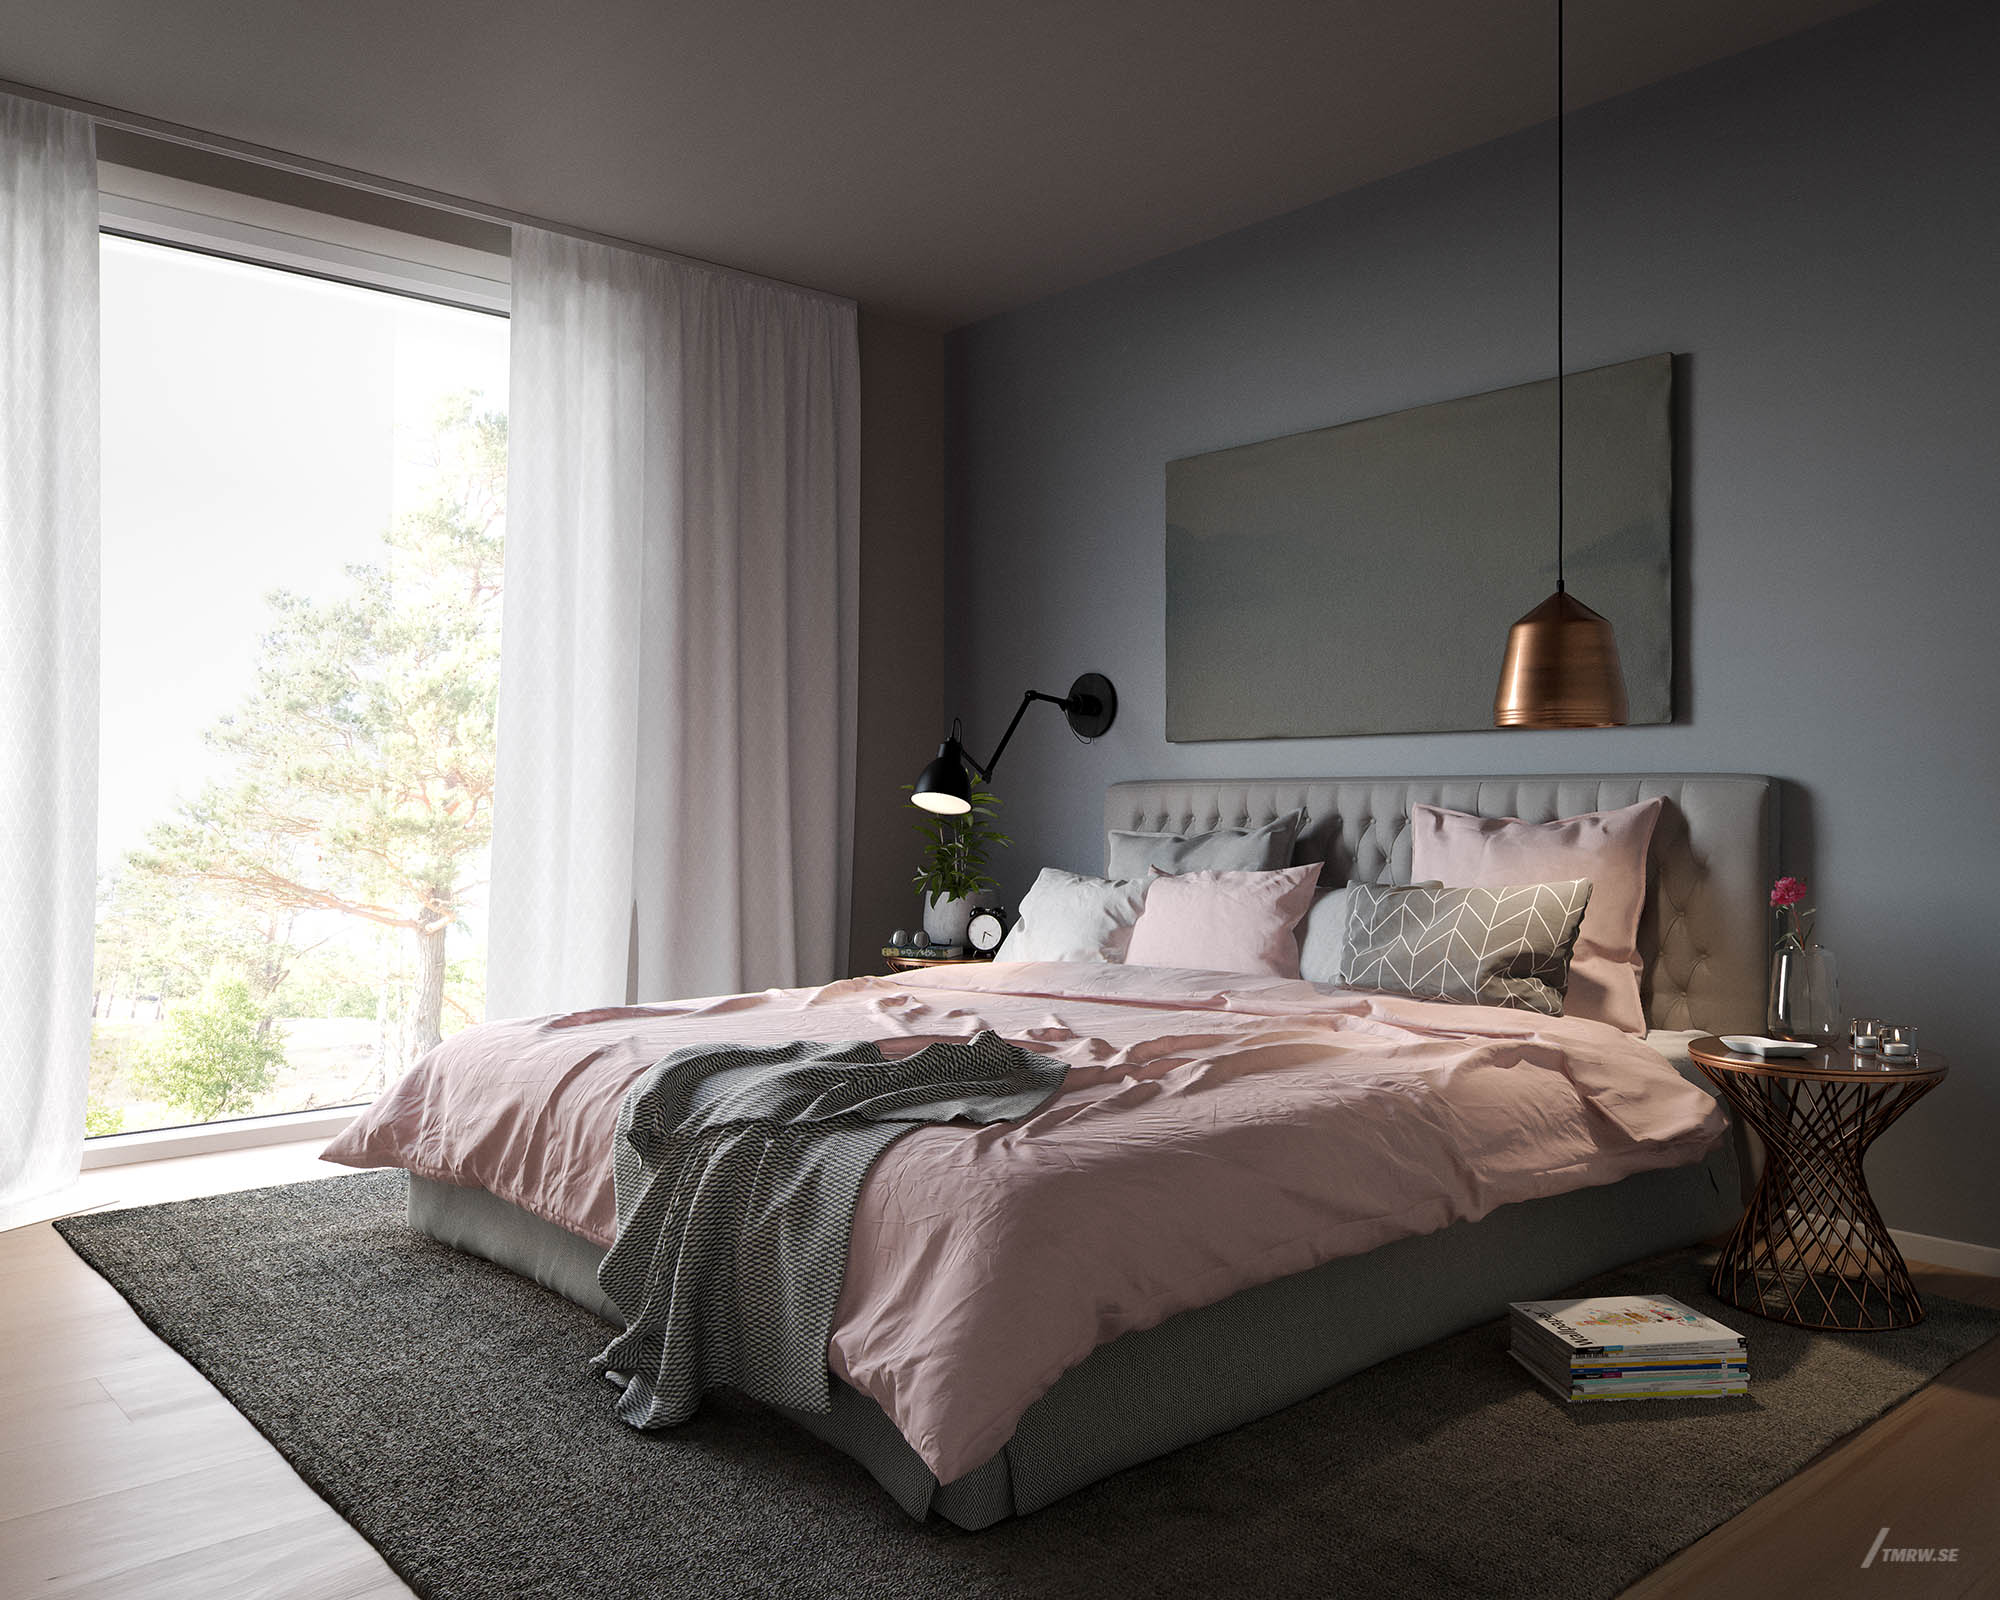 Architectural visualization of Högmora for Imola a bedroom in a living house in day light form an interior view.